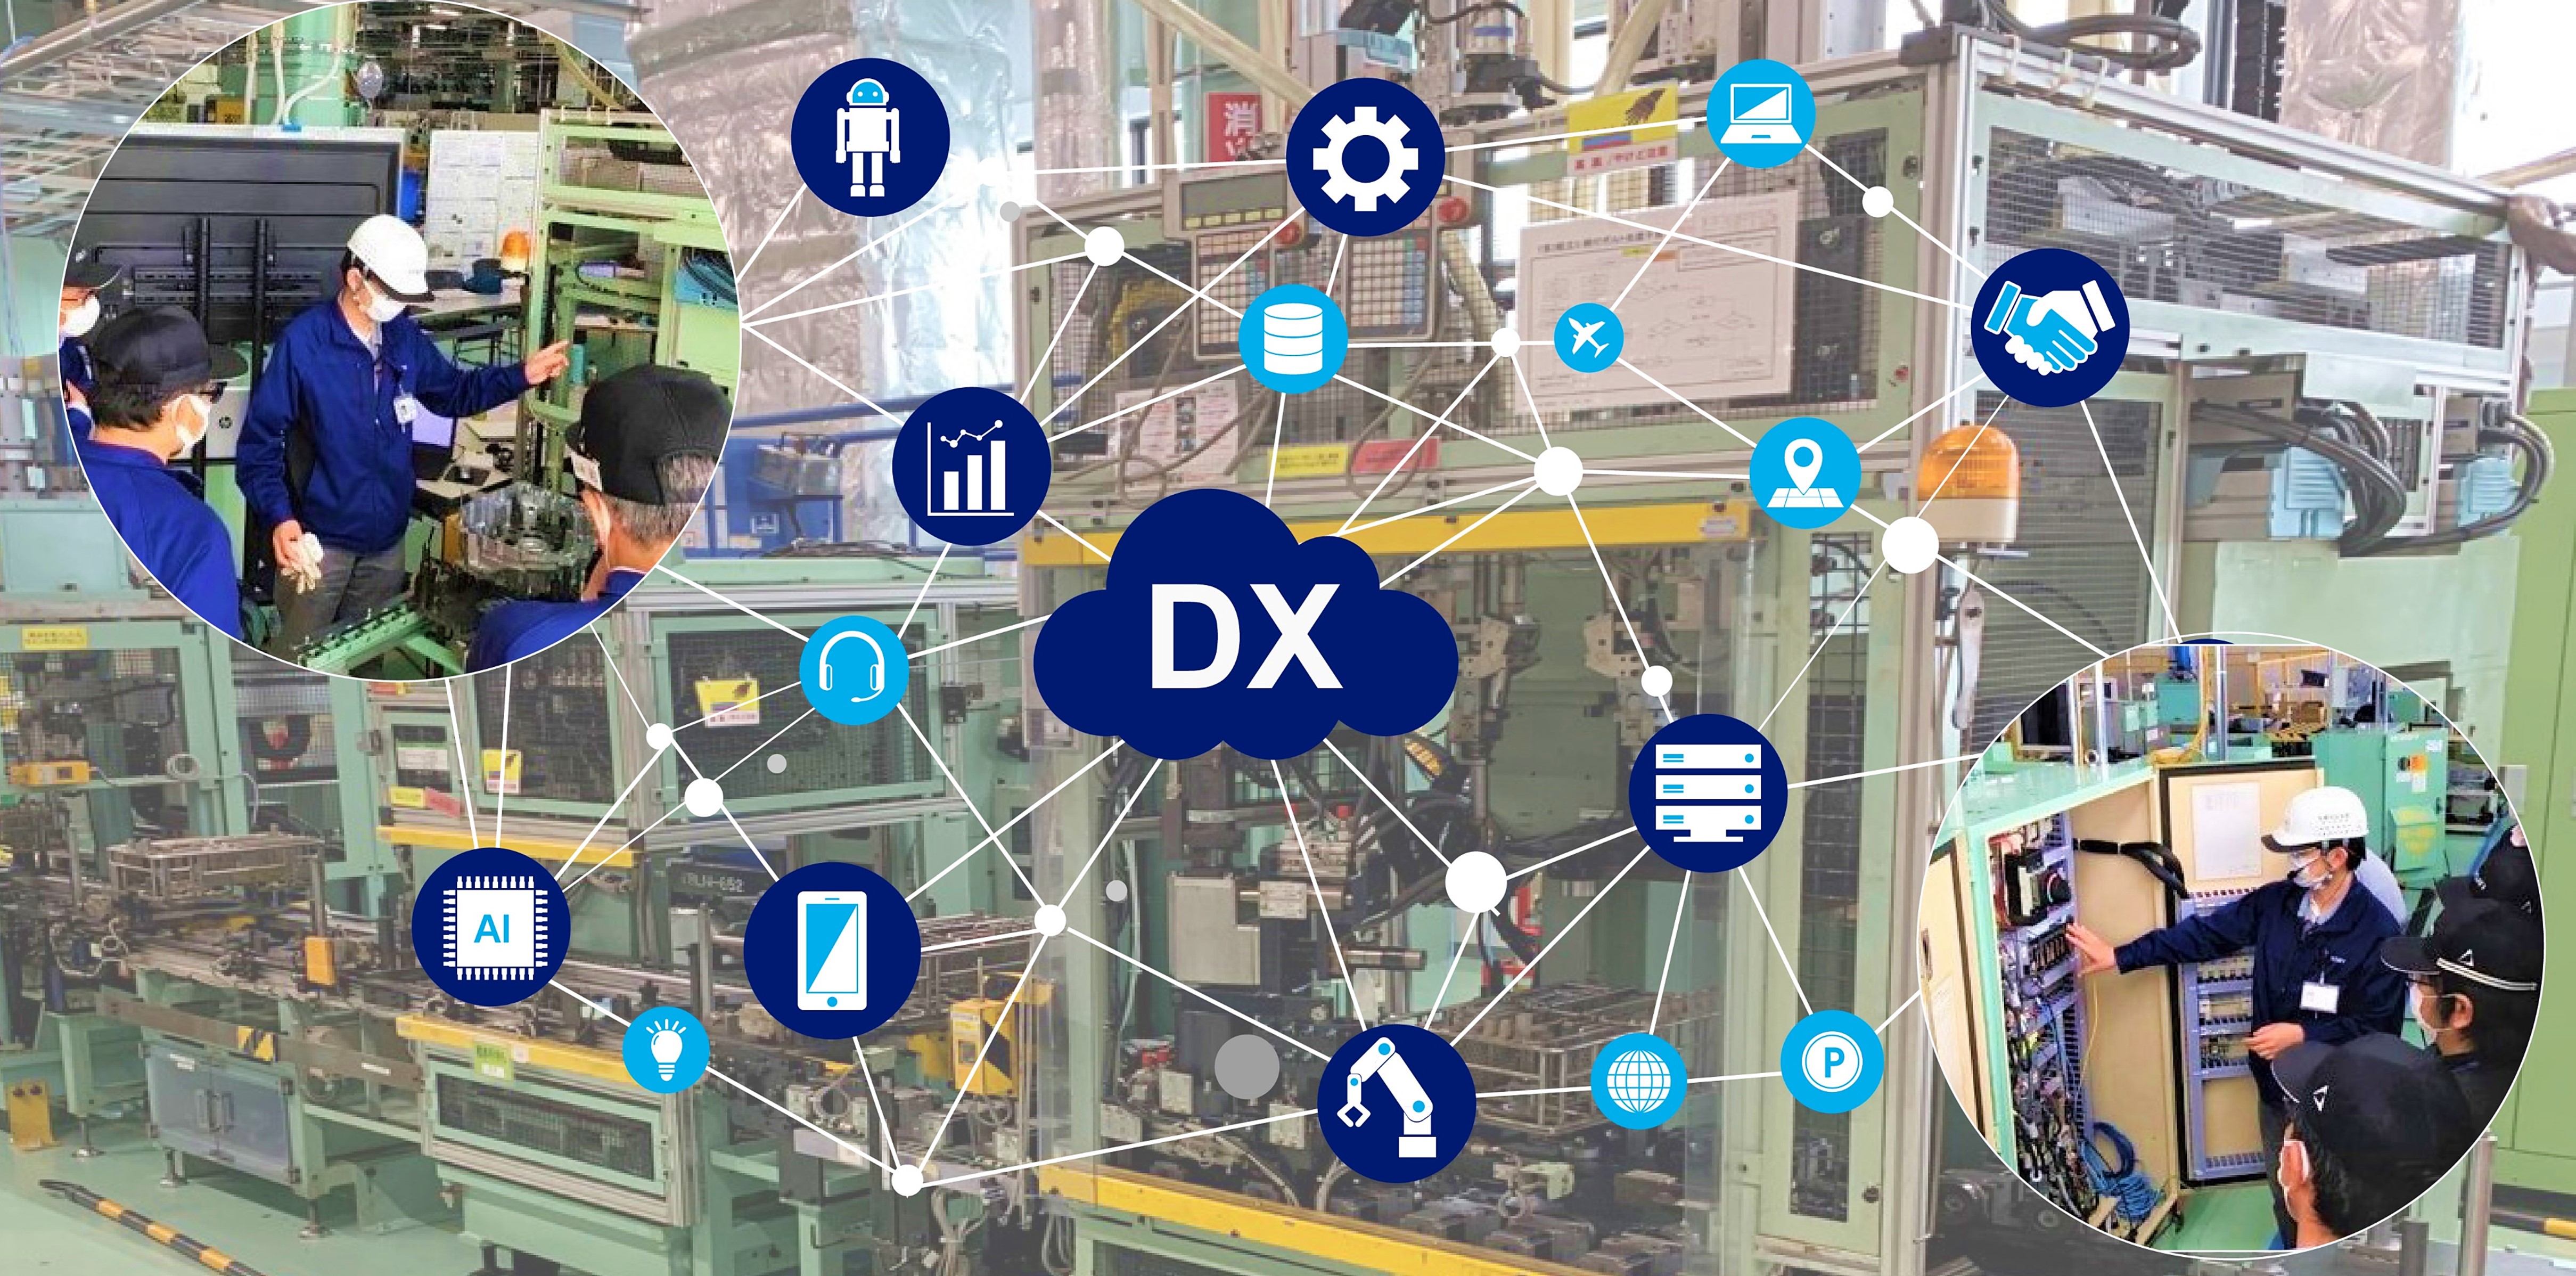 DX Changes Production and Human Resources　